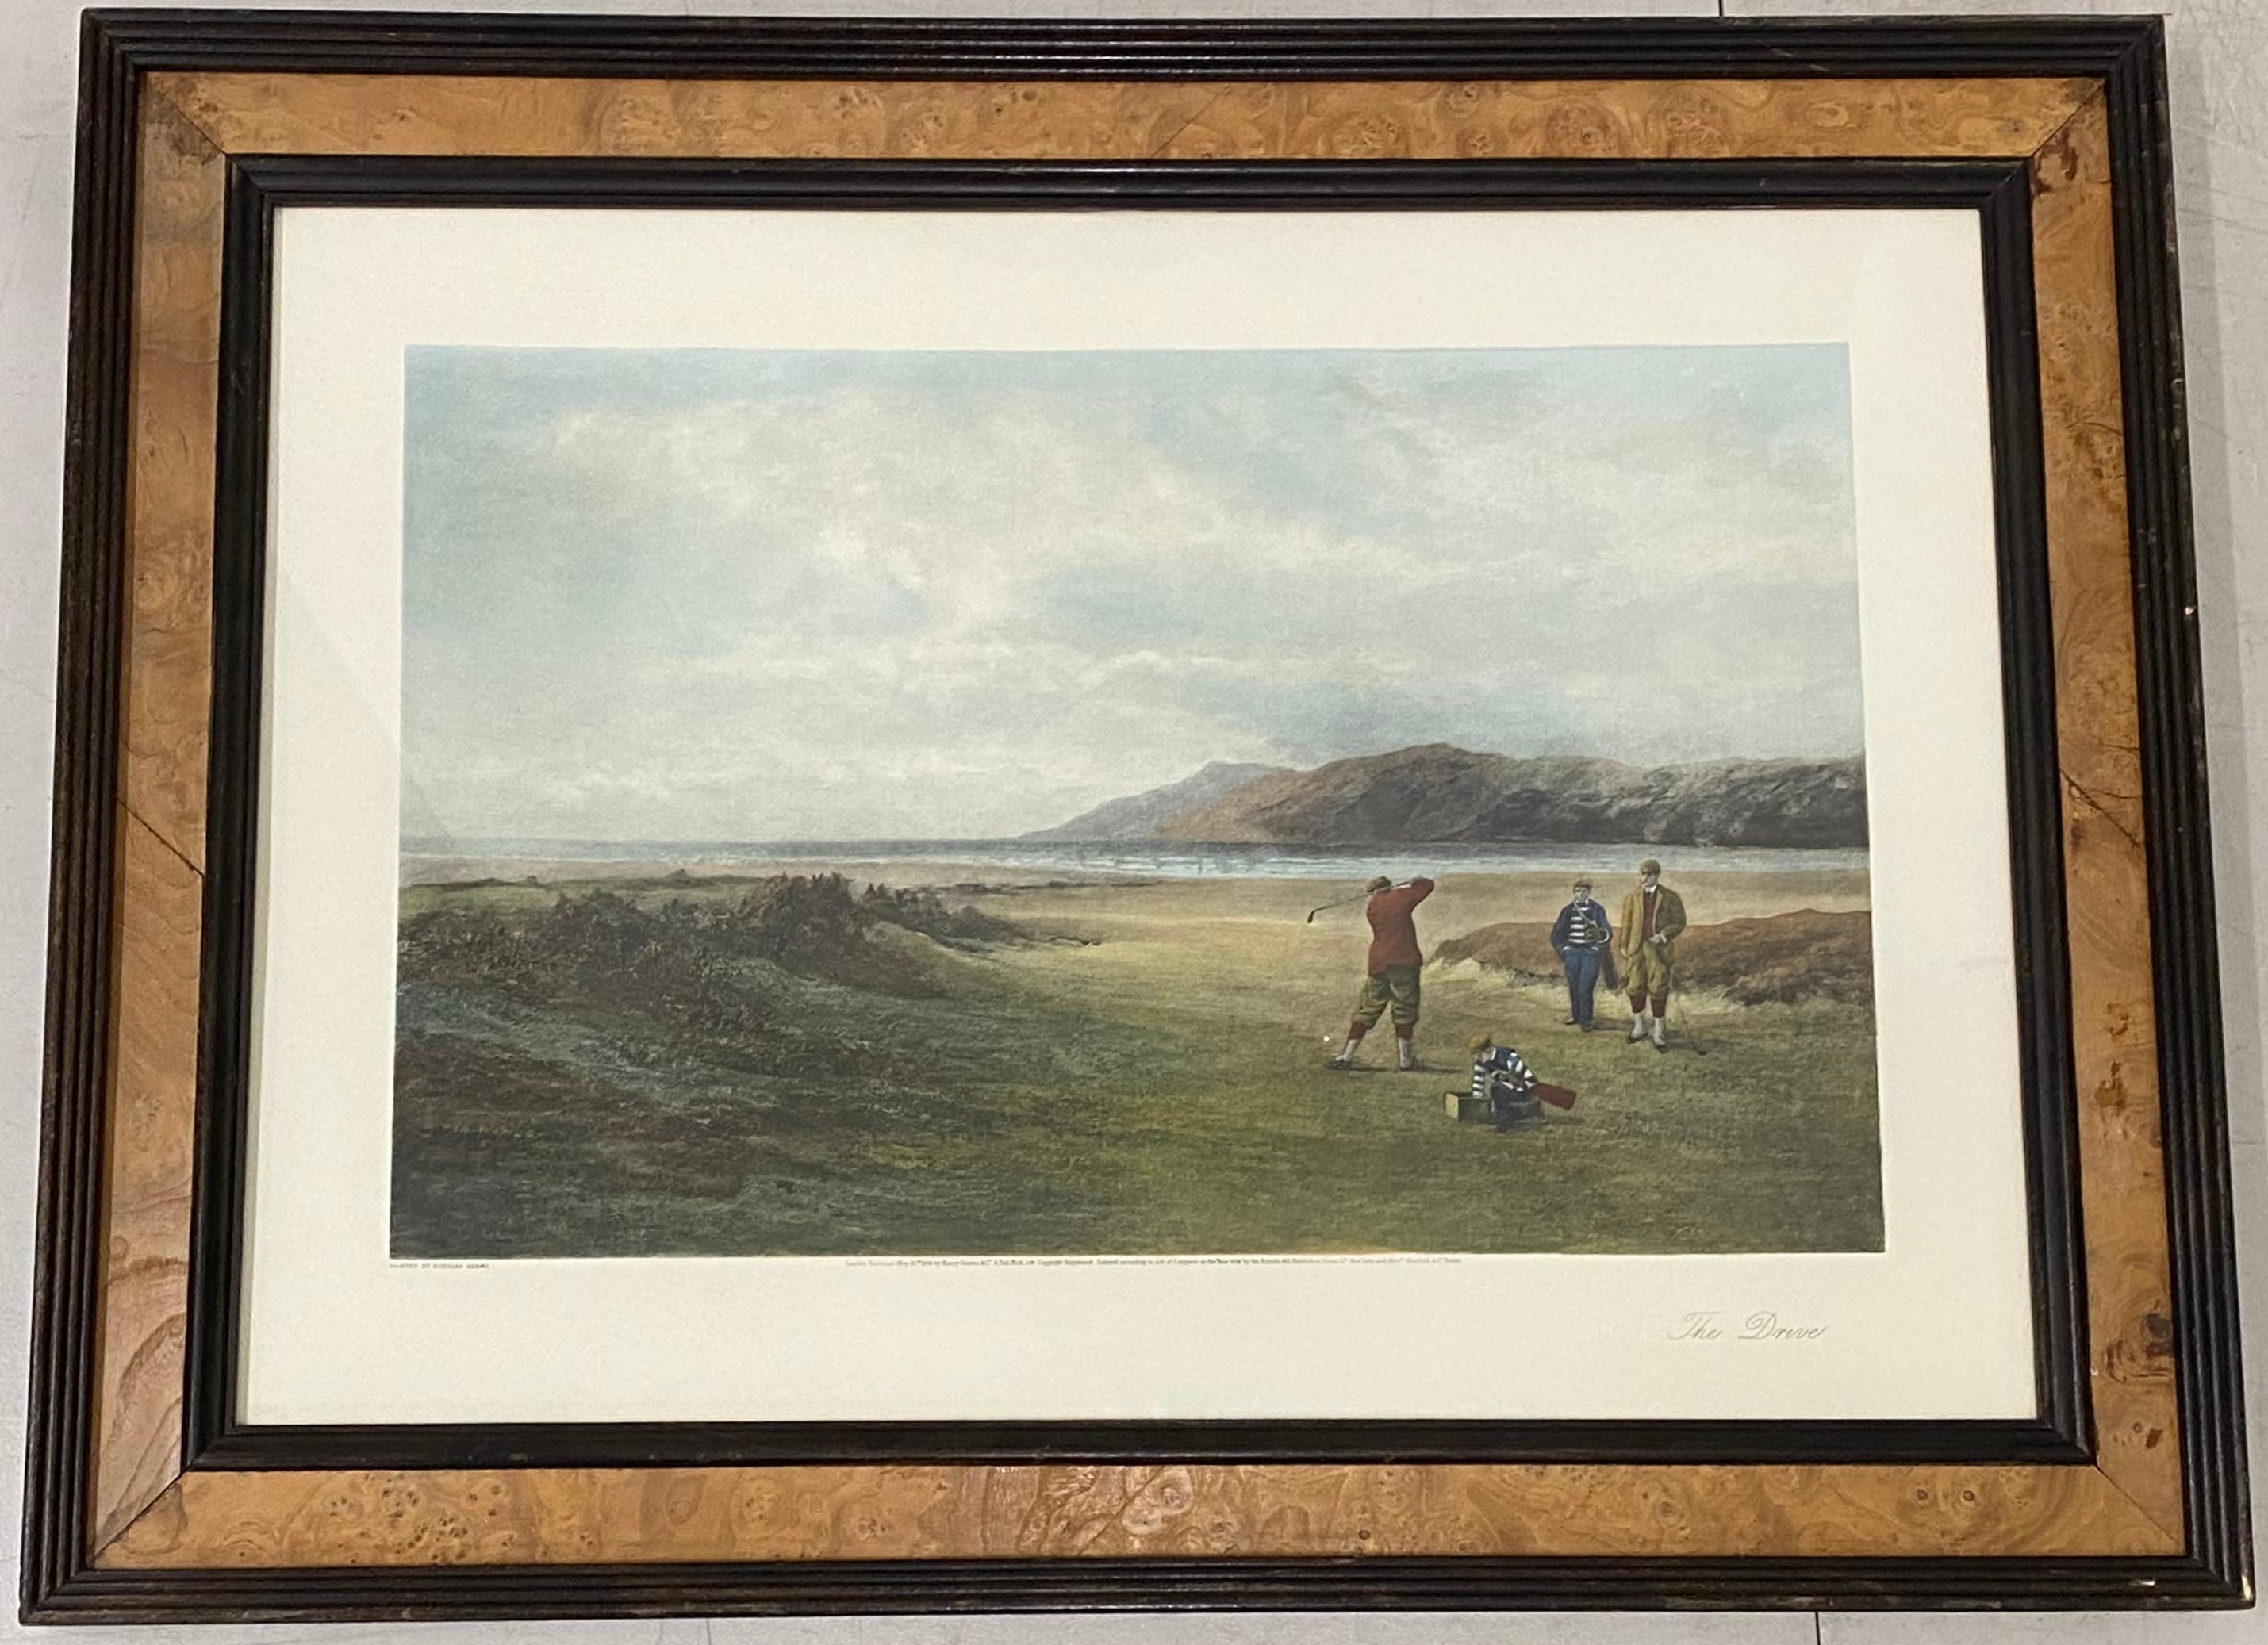 Unknown Print - Antique Color Lithograph "The Drive" Original Painting by Adams, Published in Lo